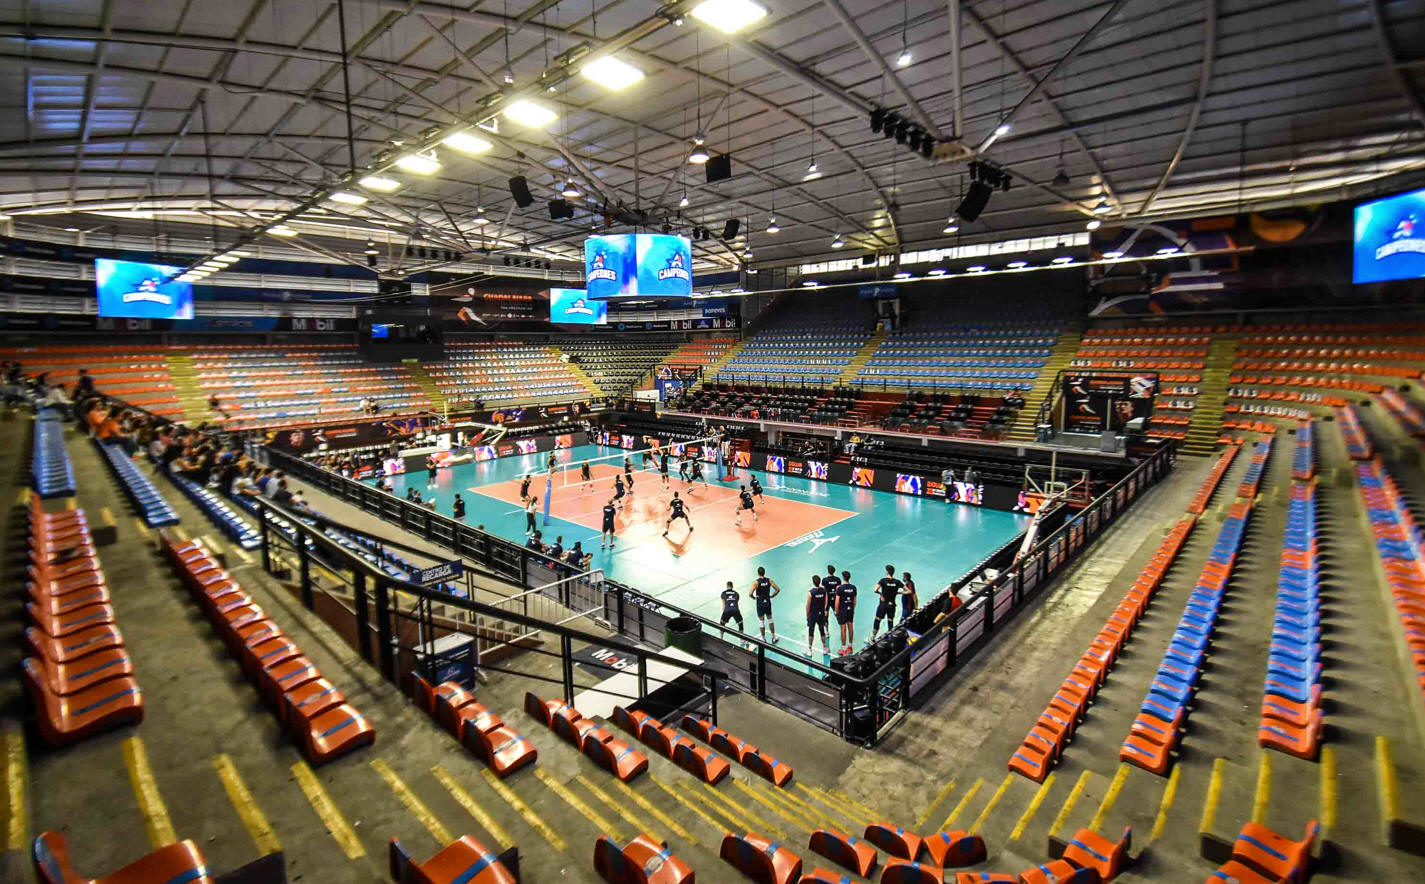 Pan American Senior Men’s Volleyball Cup with equal level, according to coaches